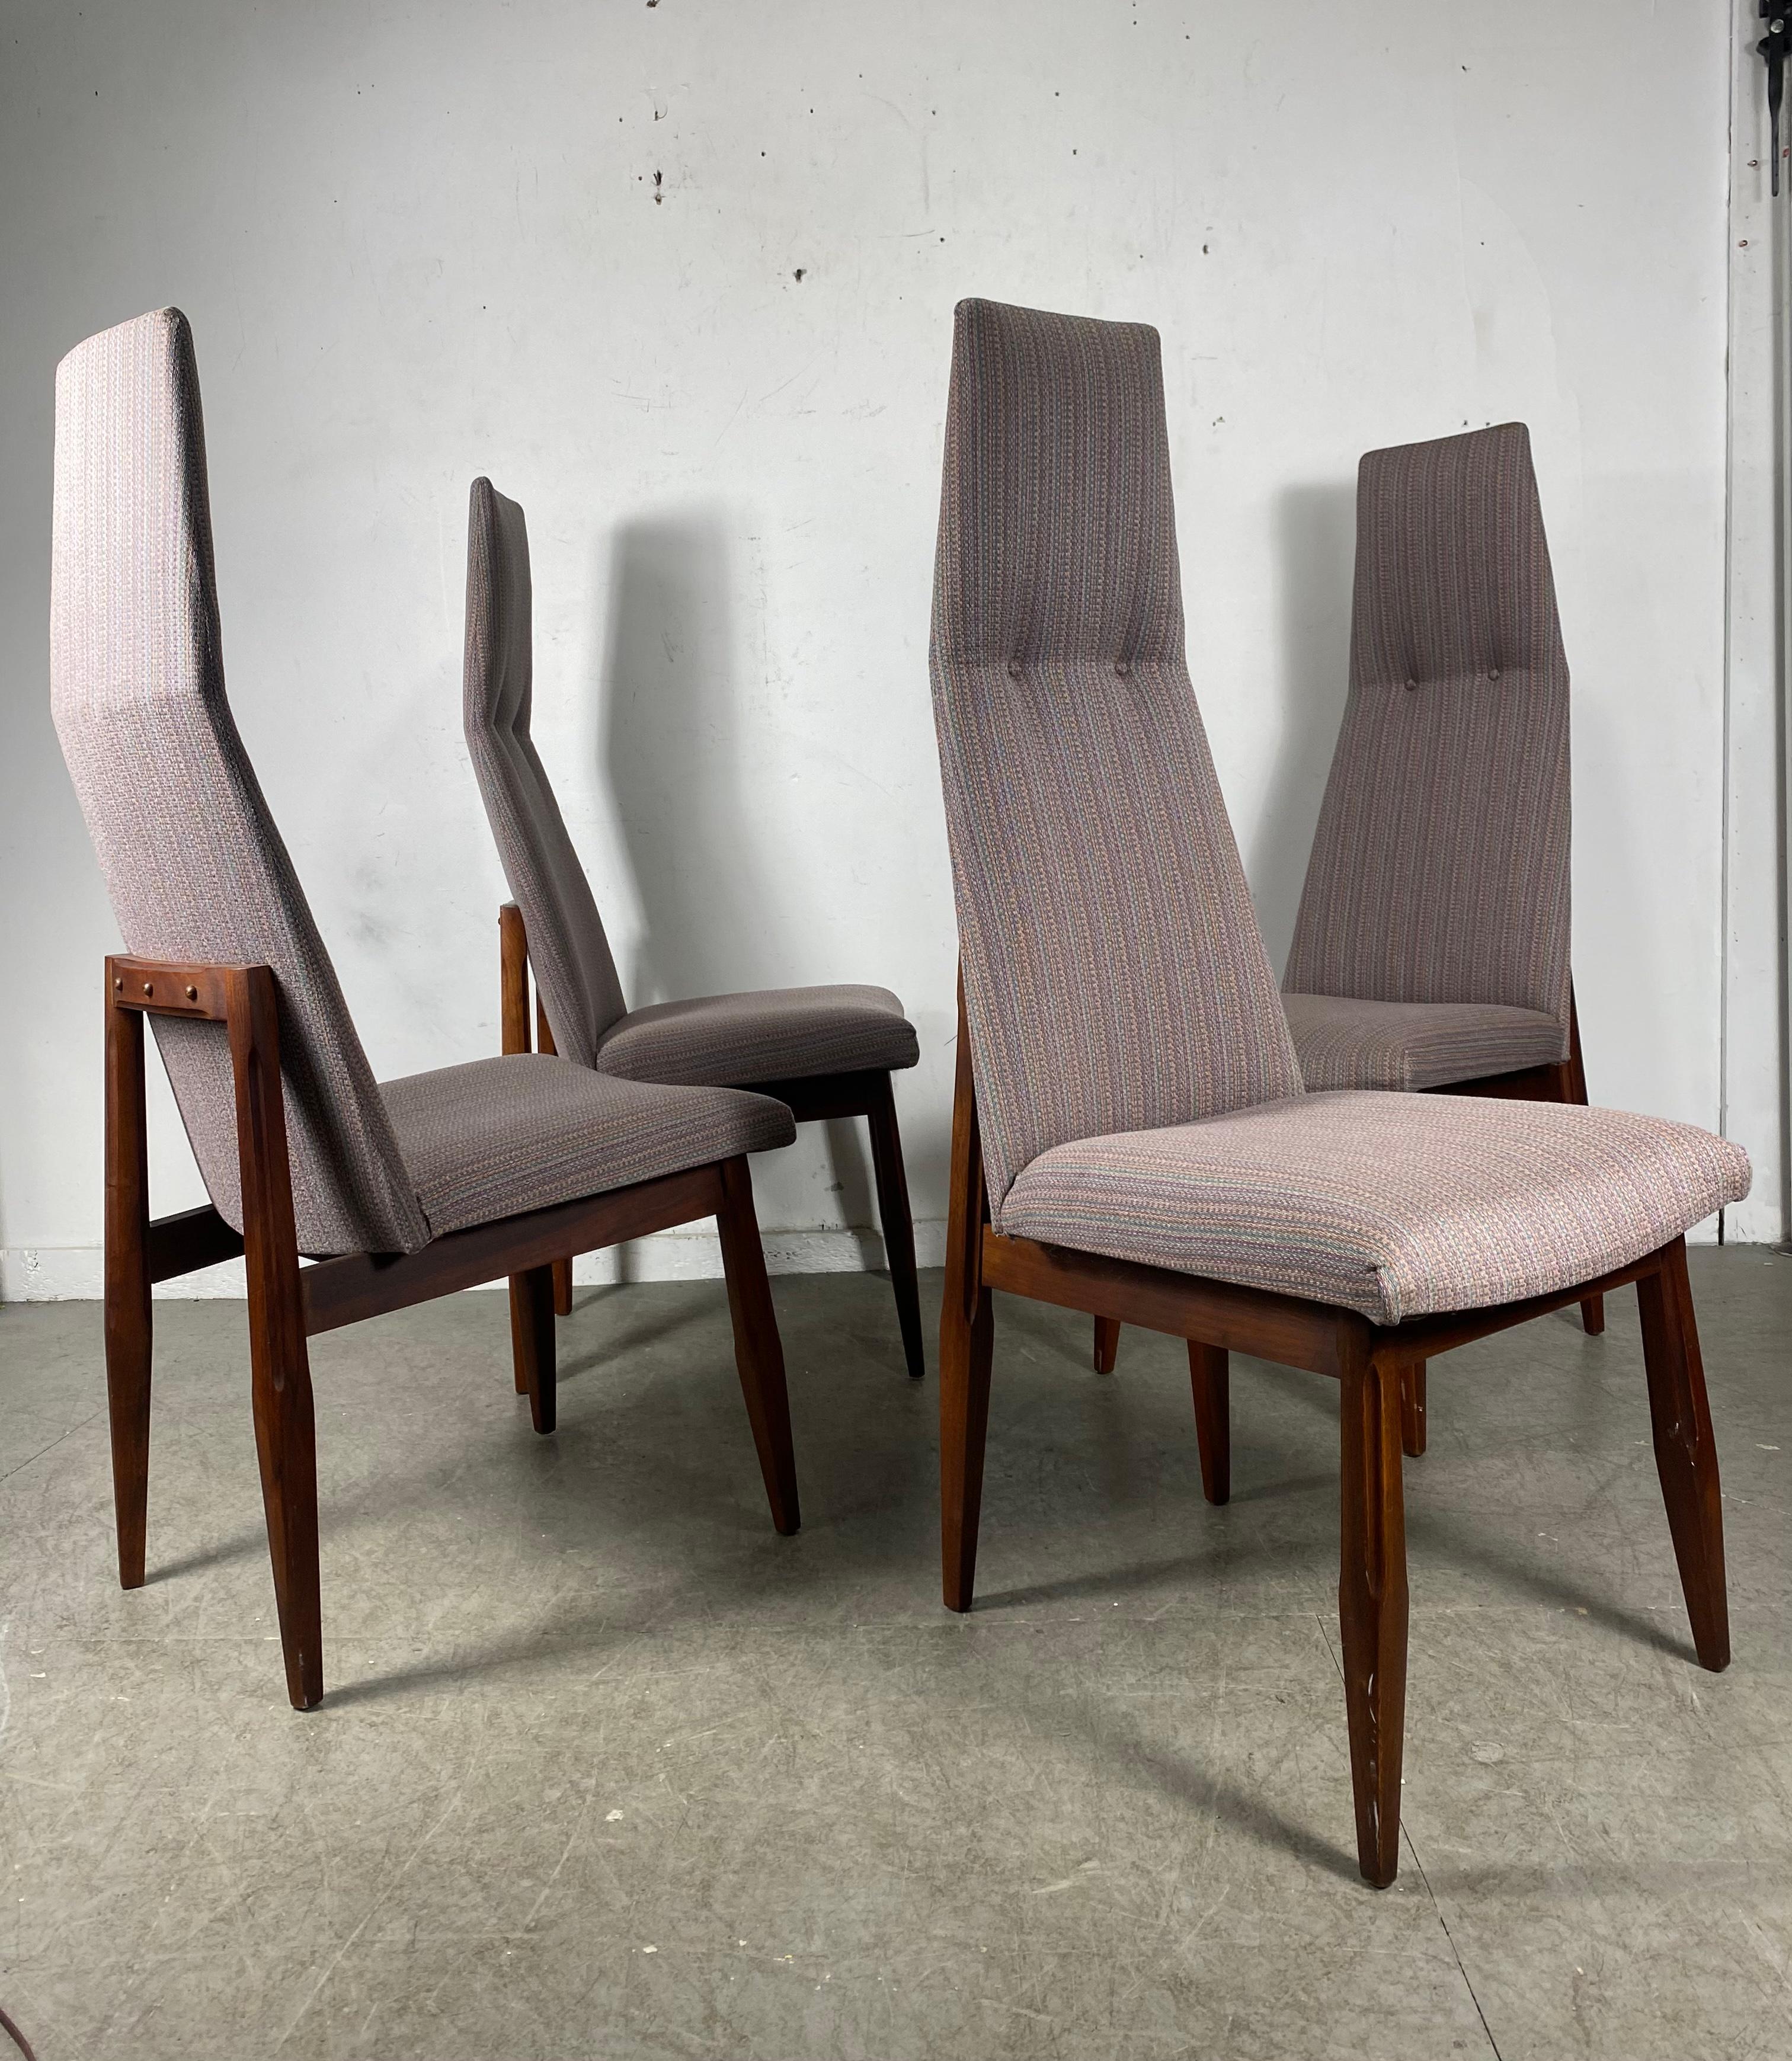 Classic Modernist set of 4 dining chairs attributed to Adrian Pearsall, apparently Pearsall had several designs manufactured by a Canadian Company, chair tops are made exactly the same as the Classic Pearsall dining chair, walnut bases, slightly